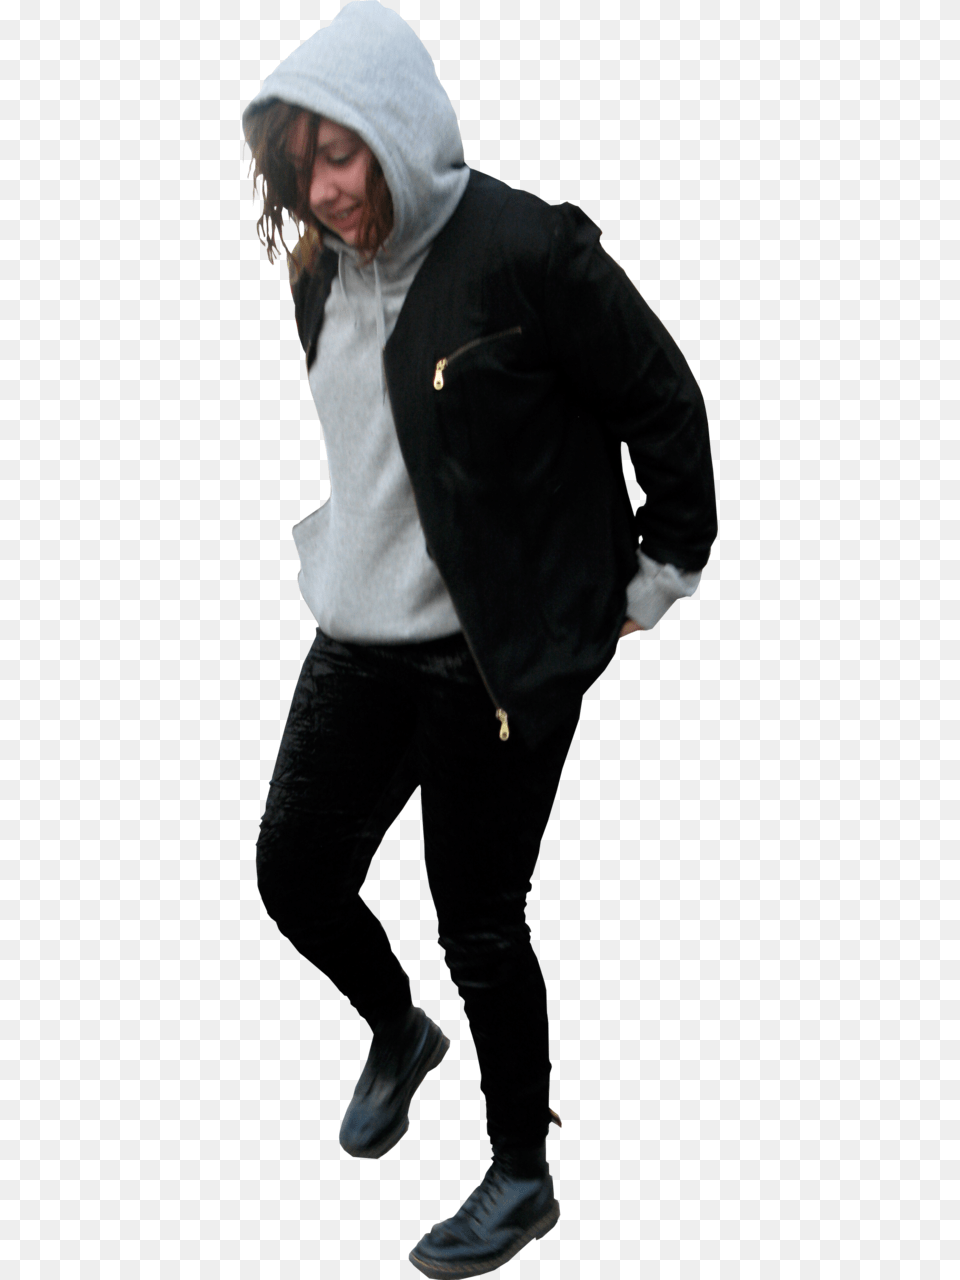 I Have Been To School All Day Today Adobe Photoshop, Jacket, Clothing, Coat, Hood Png Image